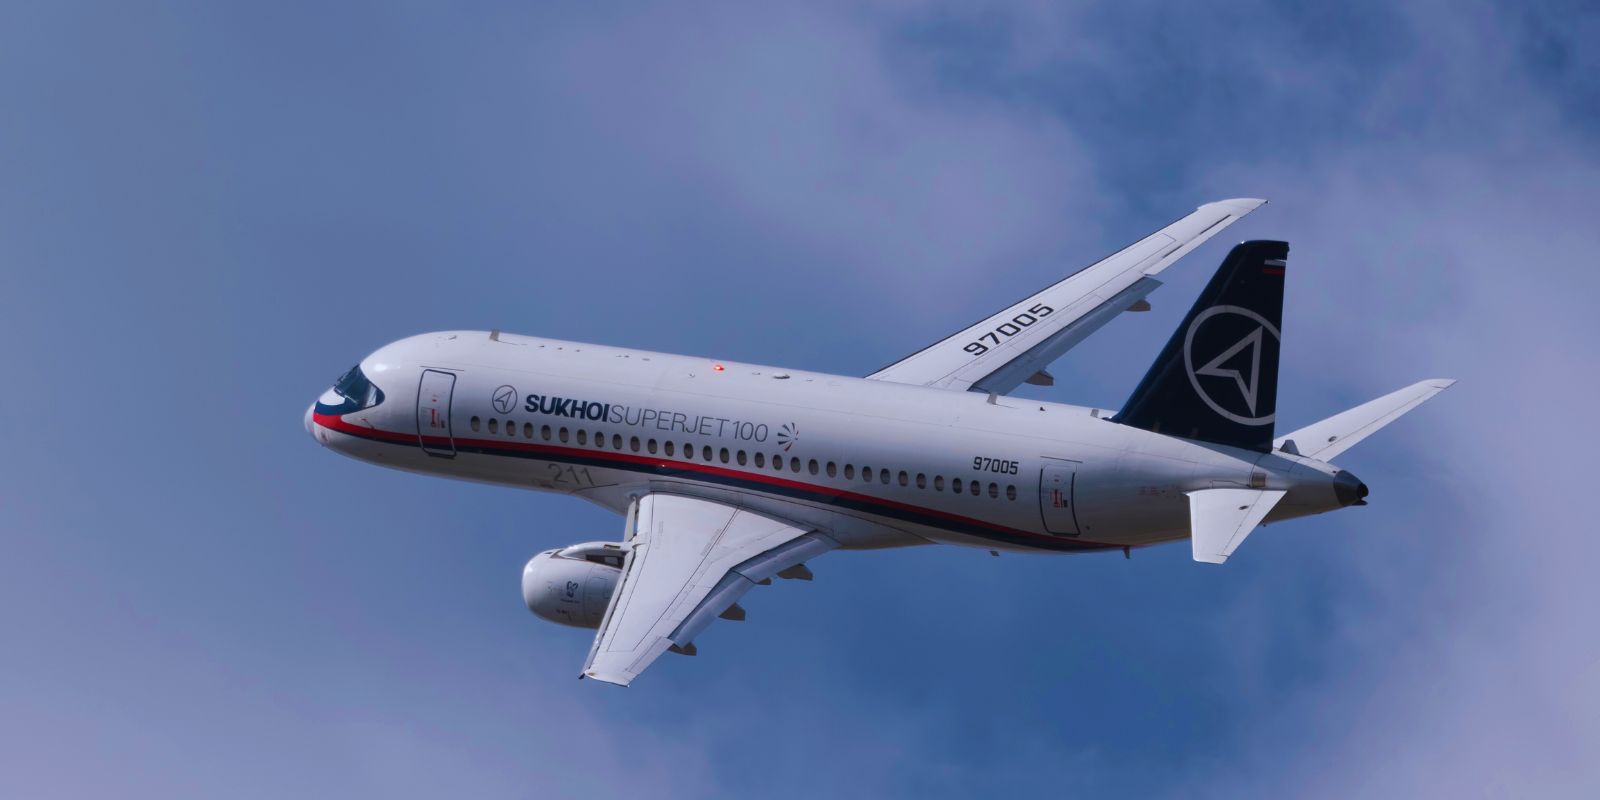 May 9th: 45 Lives Claimed In Sukhoi Superjet 100 Accident